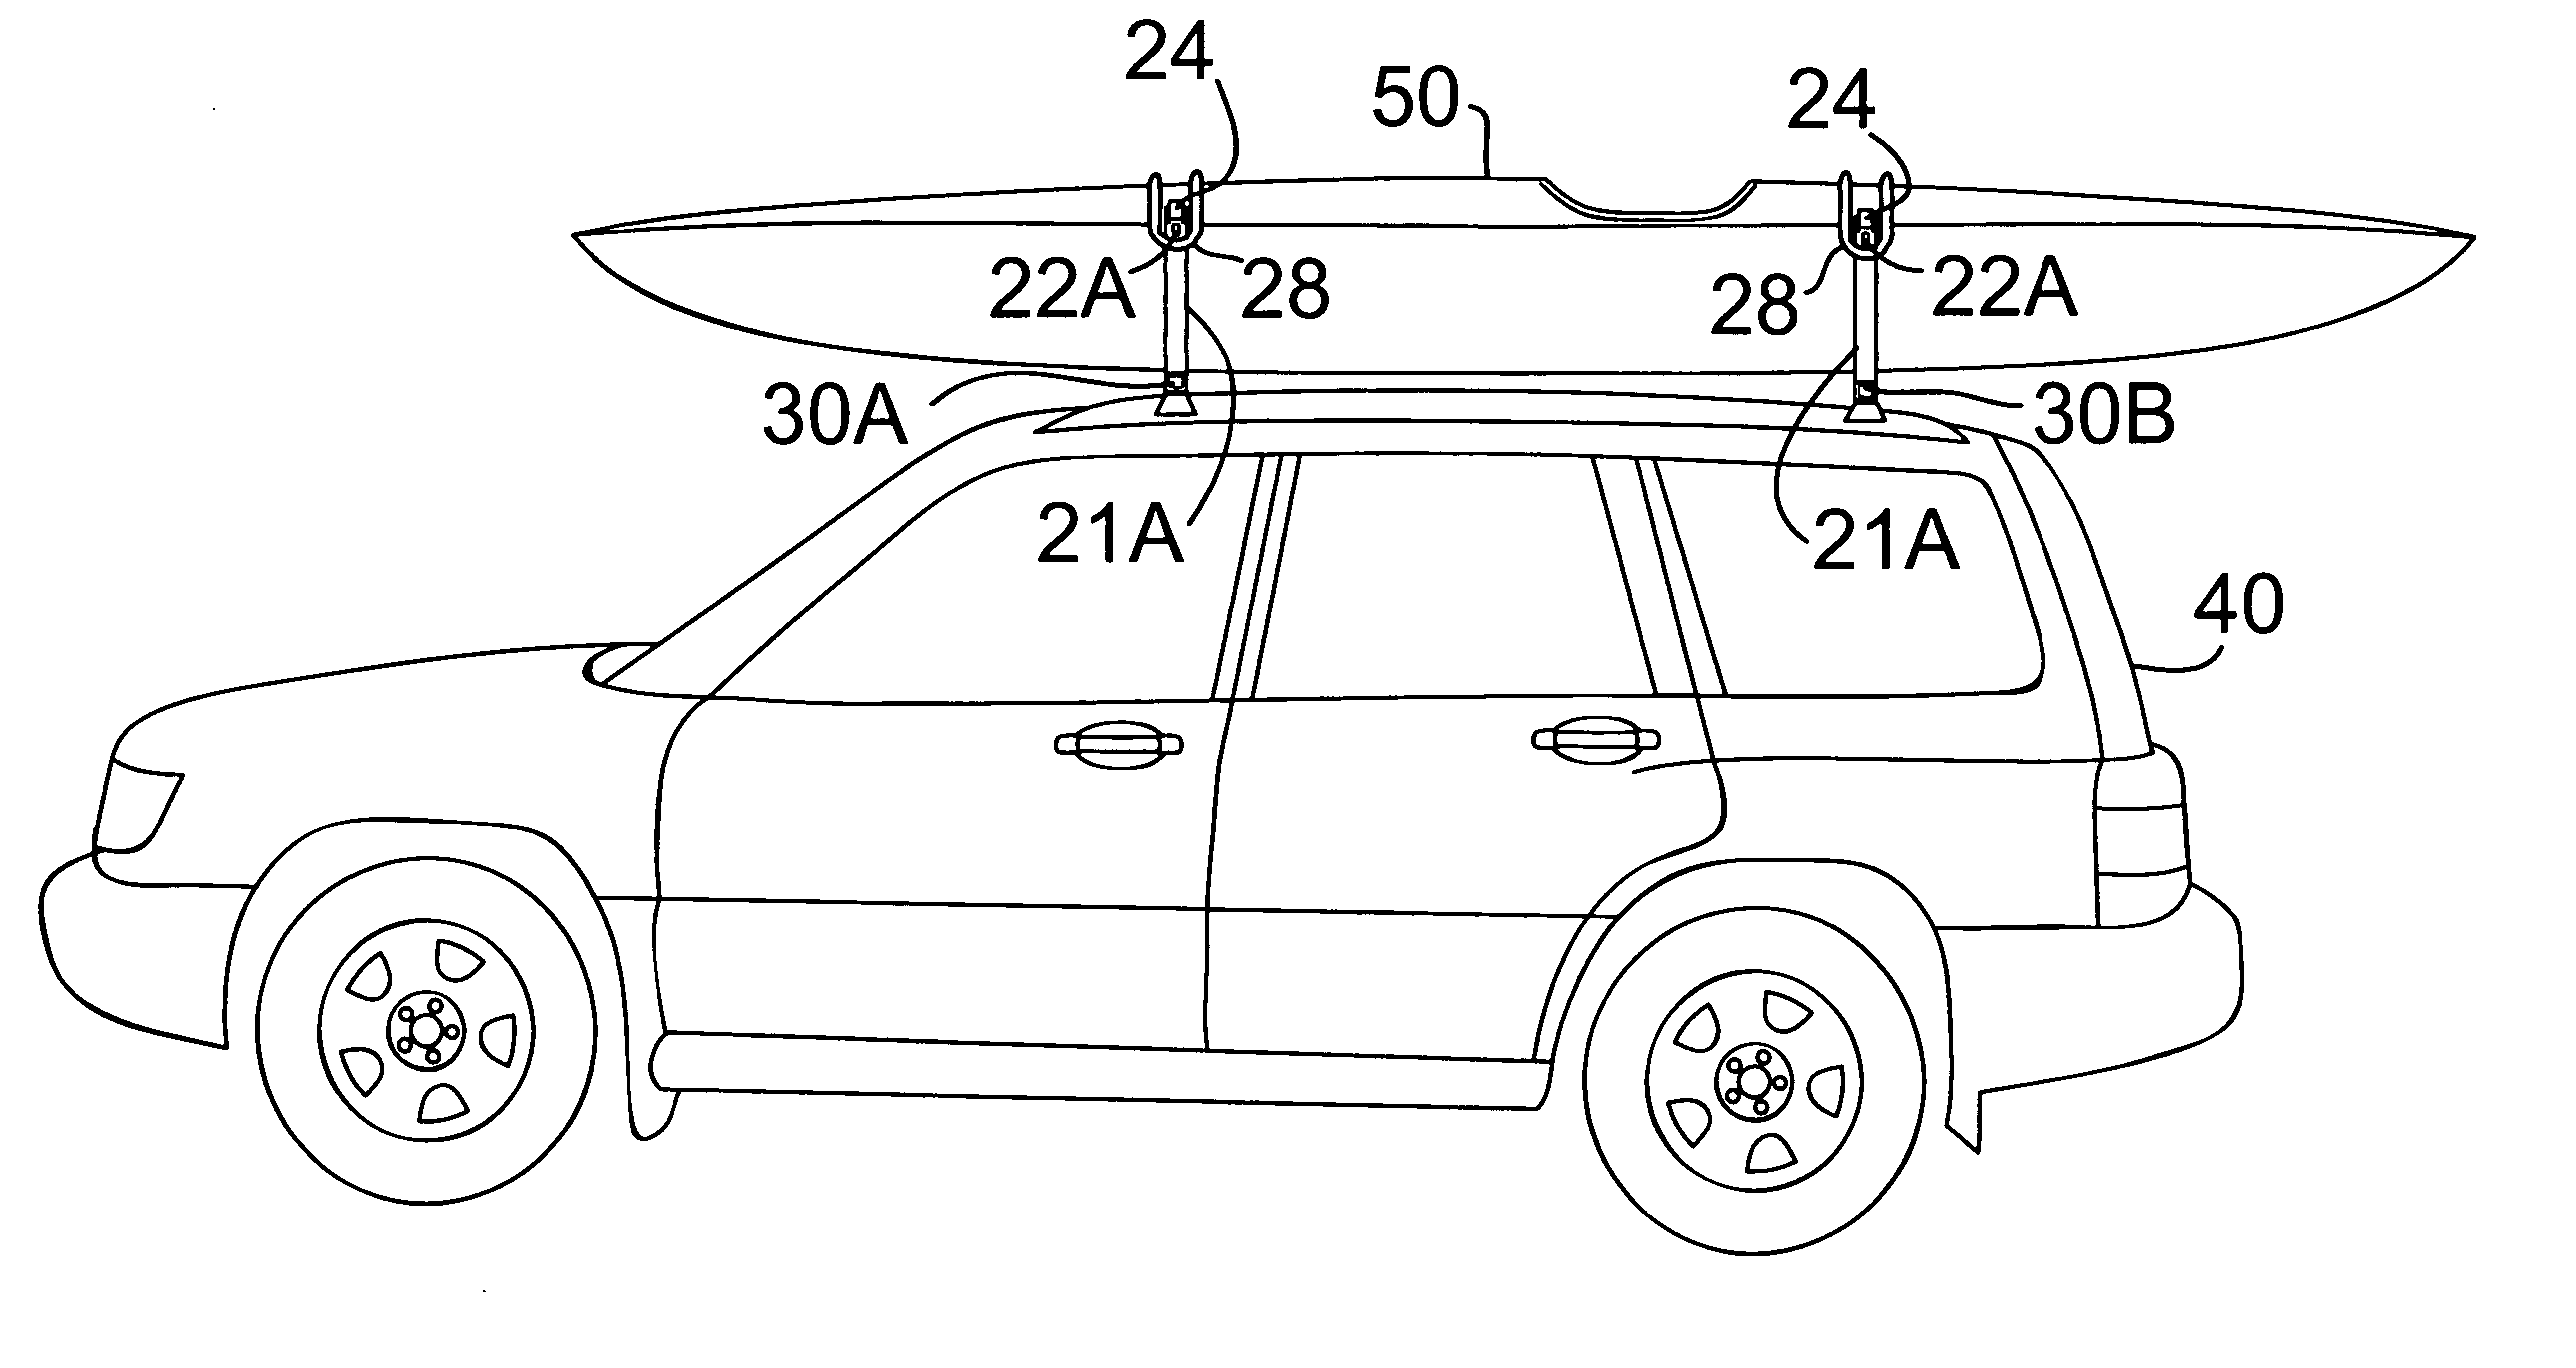 Kayak carrier for vehicle roof rack